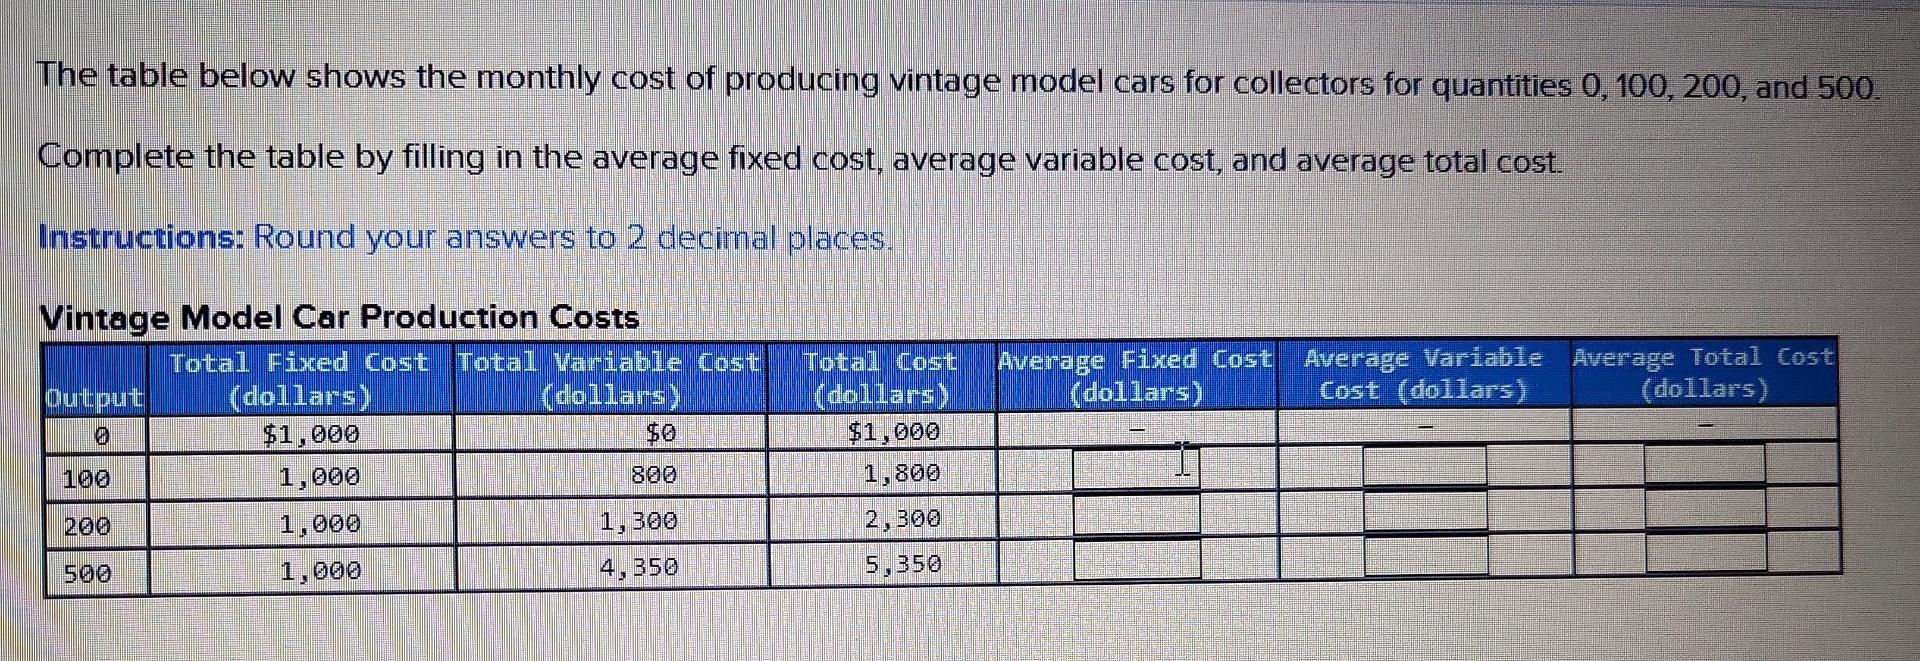 The table below shows the monthly cost of producing vintage model cars for collectors for quantities 0, 100, 200, and 500.
Co